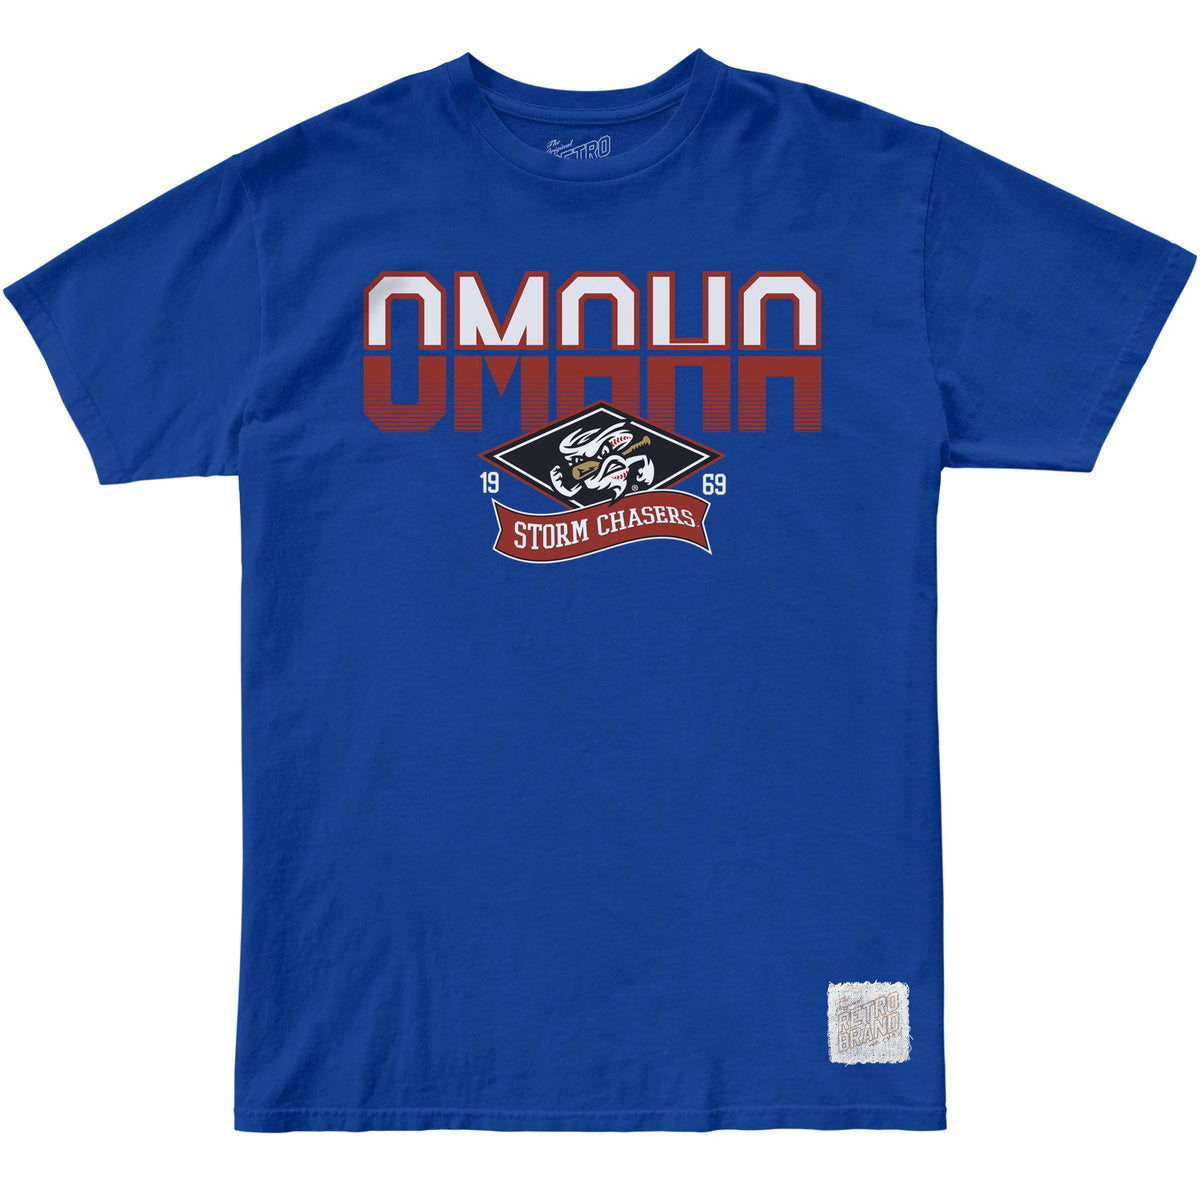 Omaha Storm Chasers 100% Cotton Tee